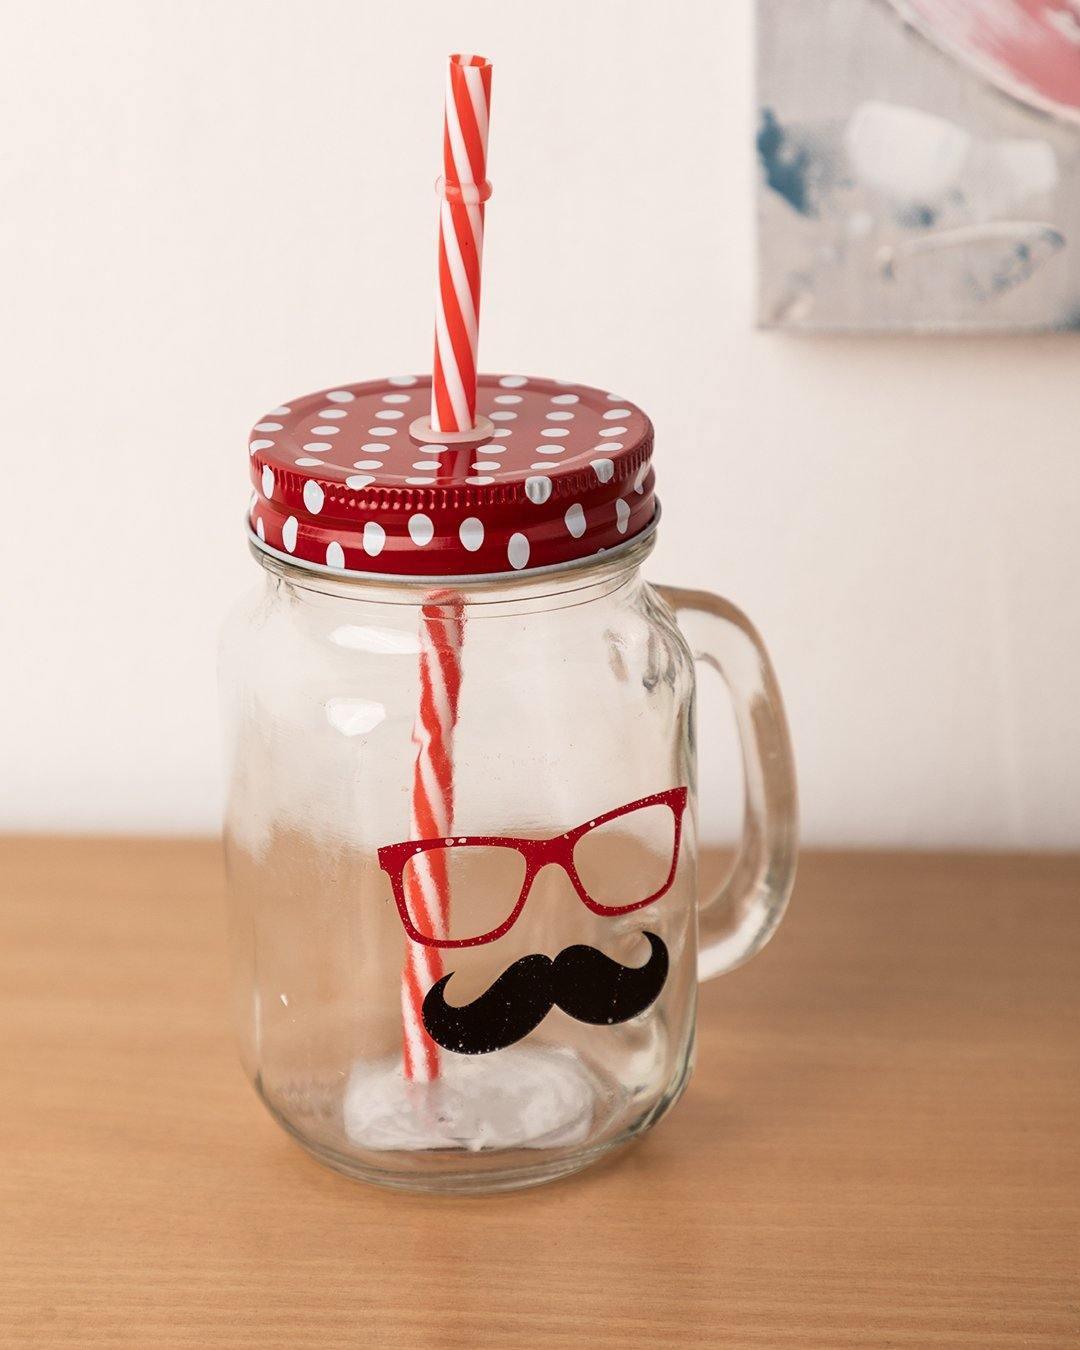 Glass Jar with Lid and Lil Sipper Glass Straw - Drinking Straws.Glass